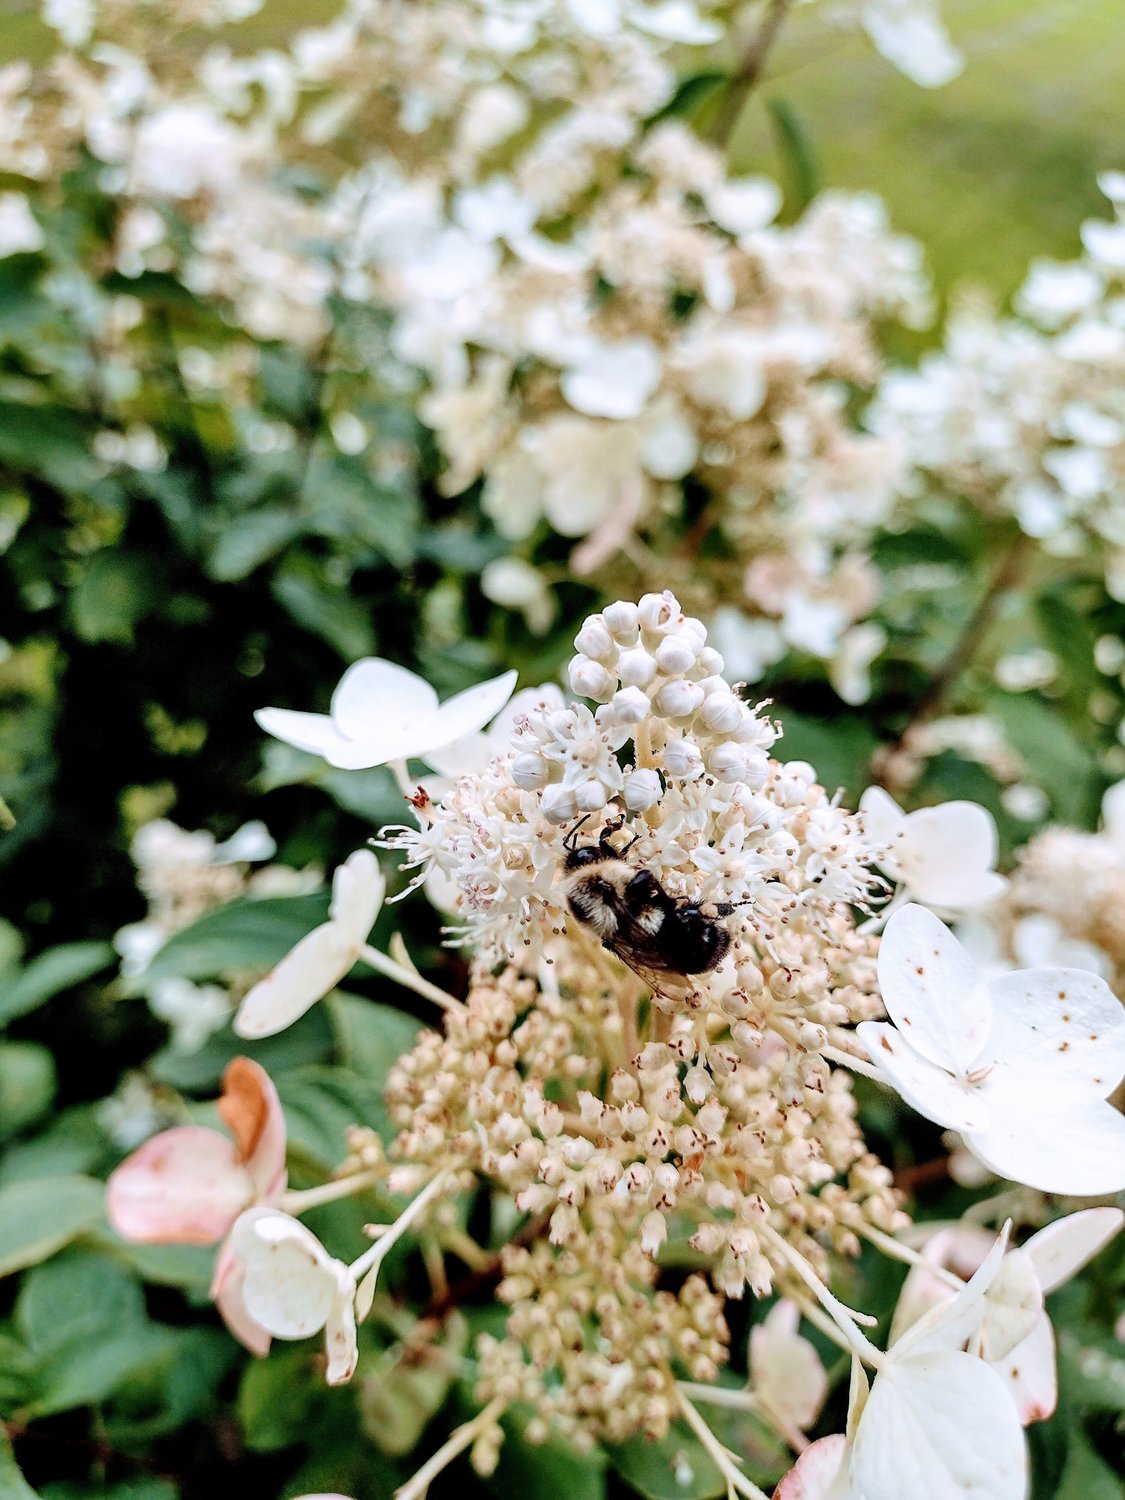 Hydrangeas are versatile and grow larger each year. Here, a lucky bumblebee partakes in the blooms.